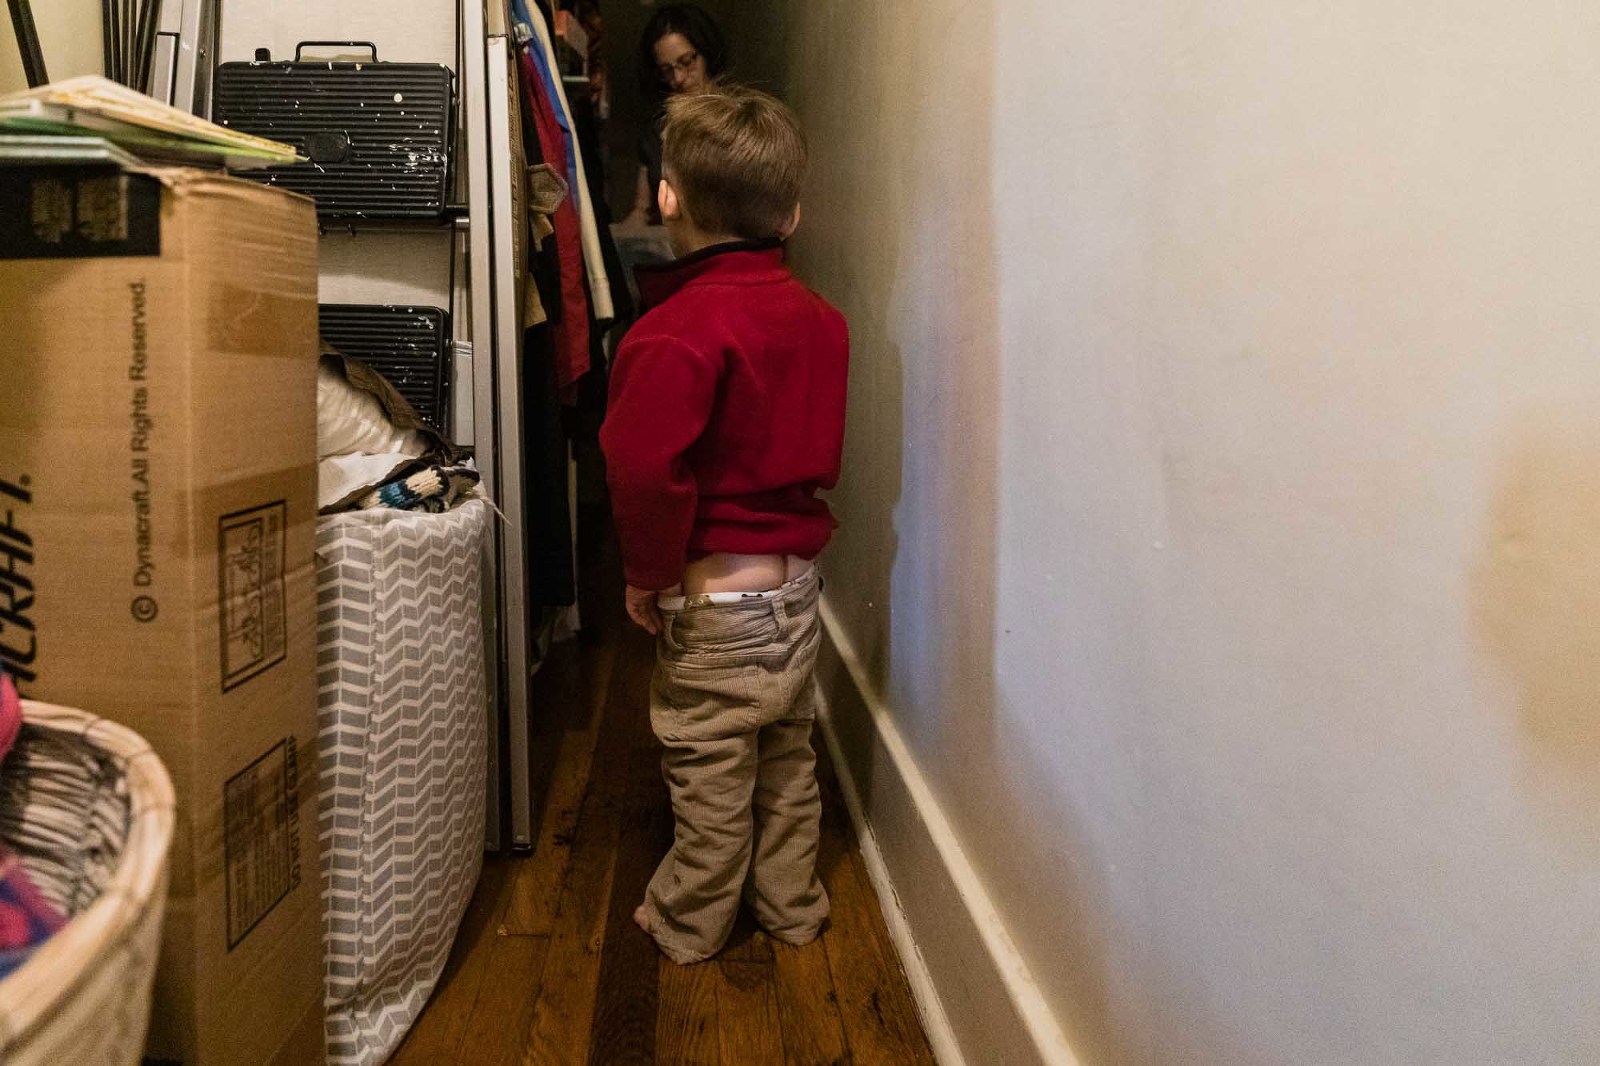 toddler pulls his pants down to display his bum, nonchalantly while talking to his mom